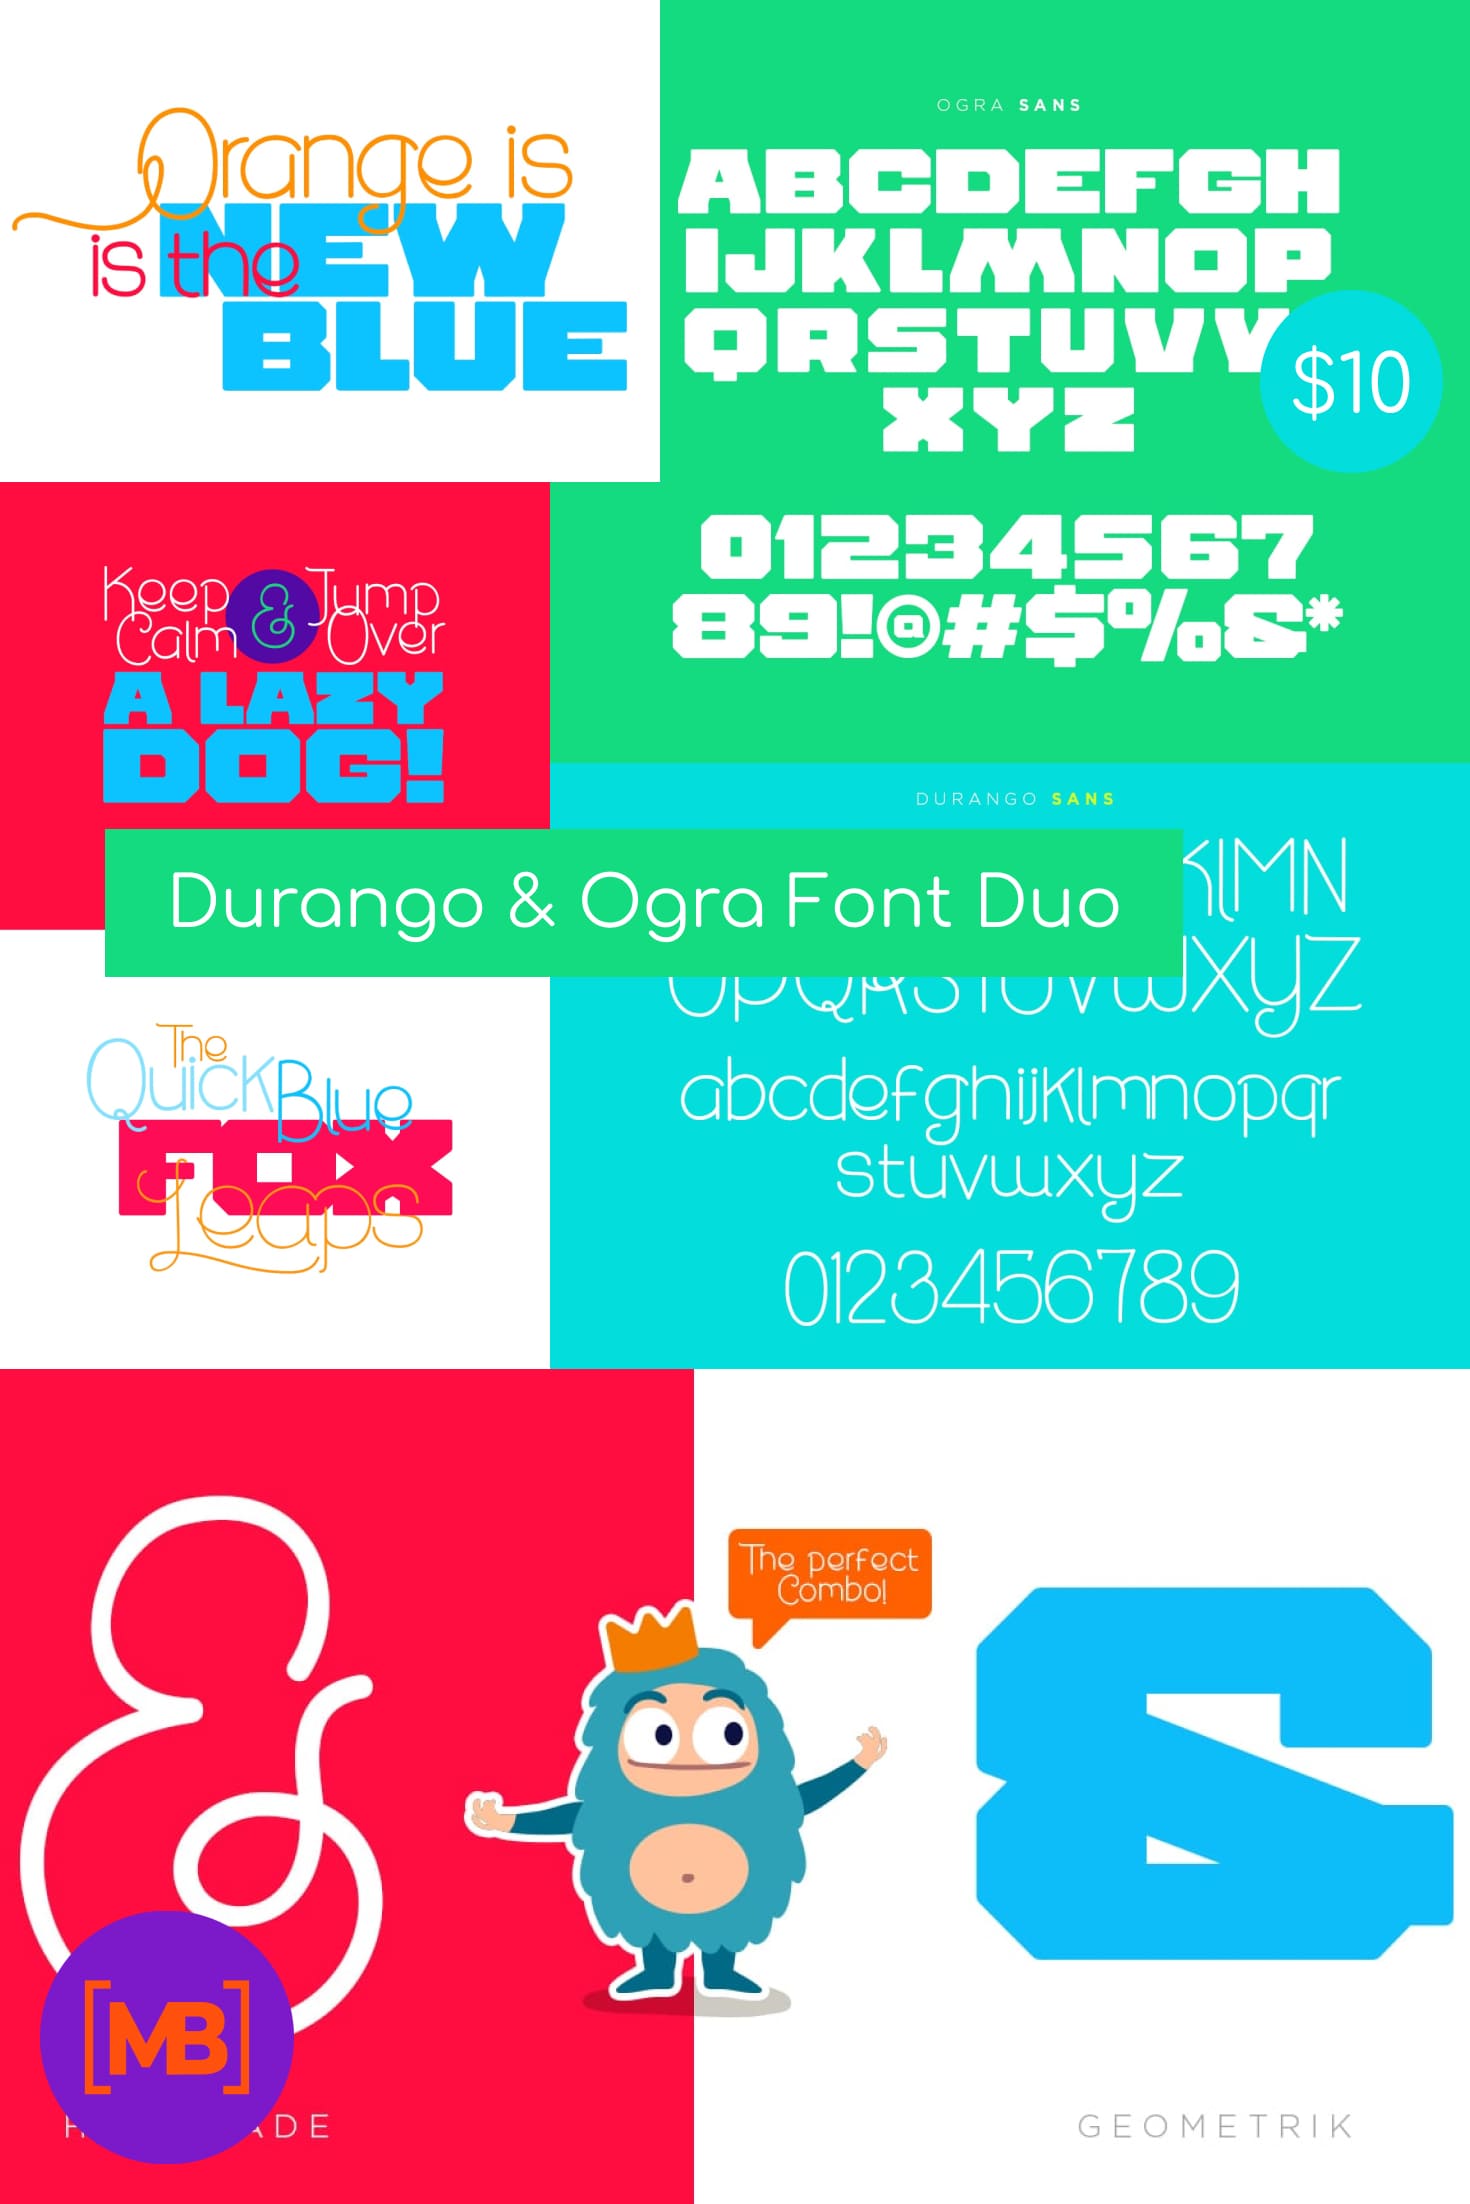 Durango & Ogra Font Duo | Only $10. Collage Image.